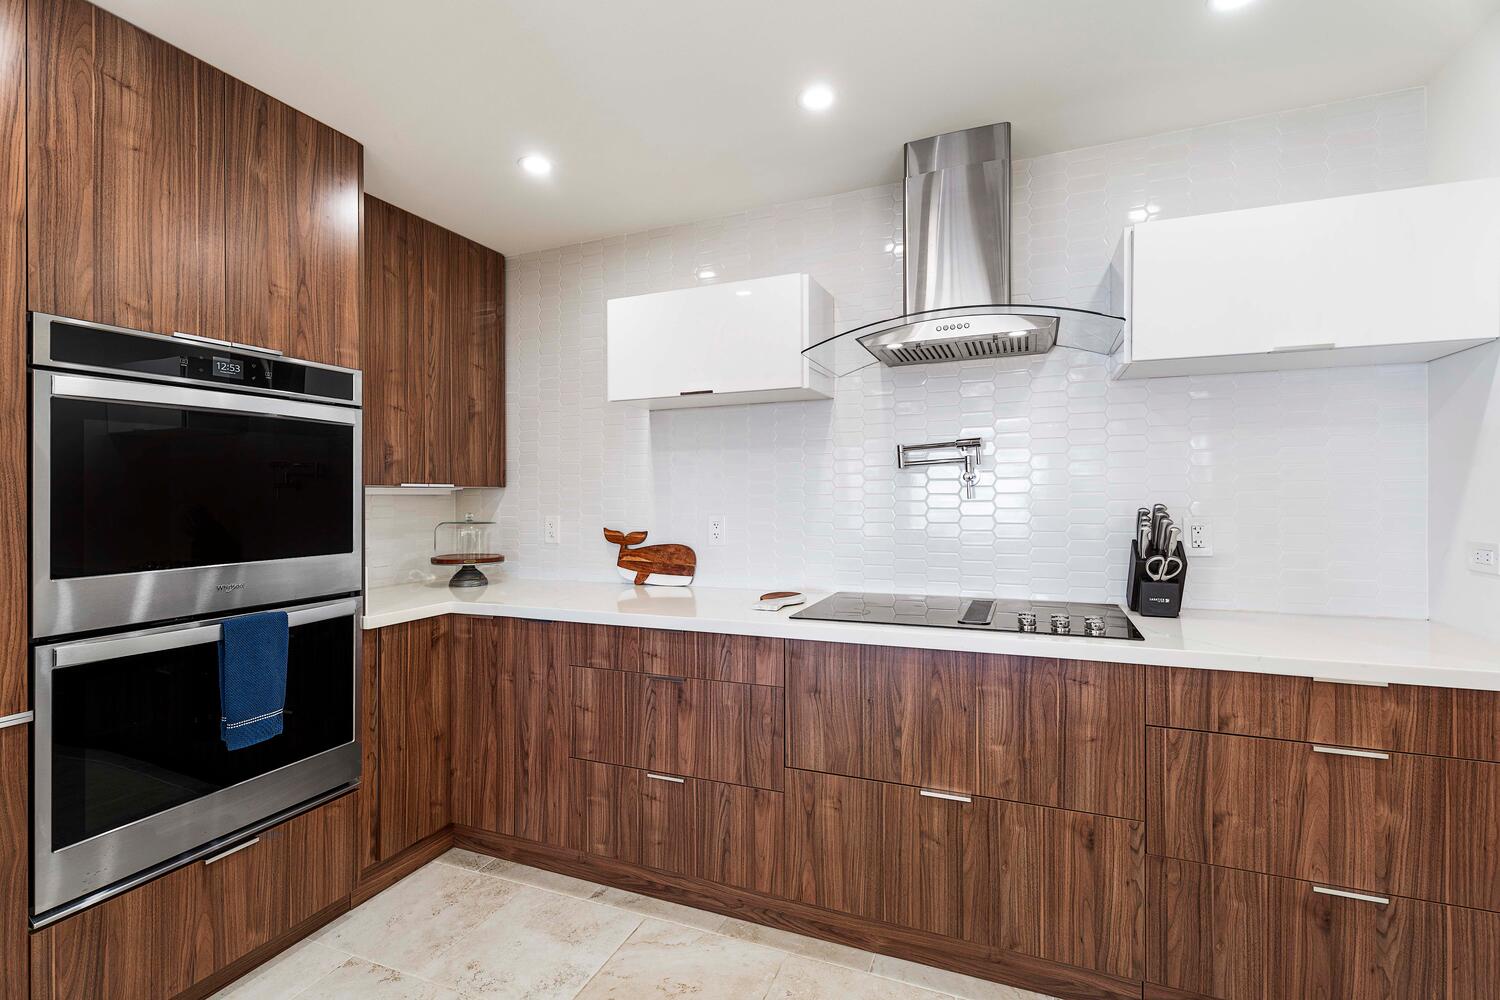 Kailua Kona Vacation Rentals, Ho'okipa Hale - Expansive kitchen with ample appliances and wide countertop for all your culinary ventures.